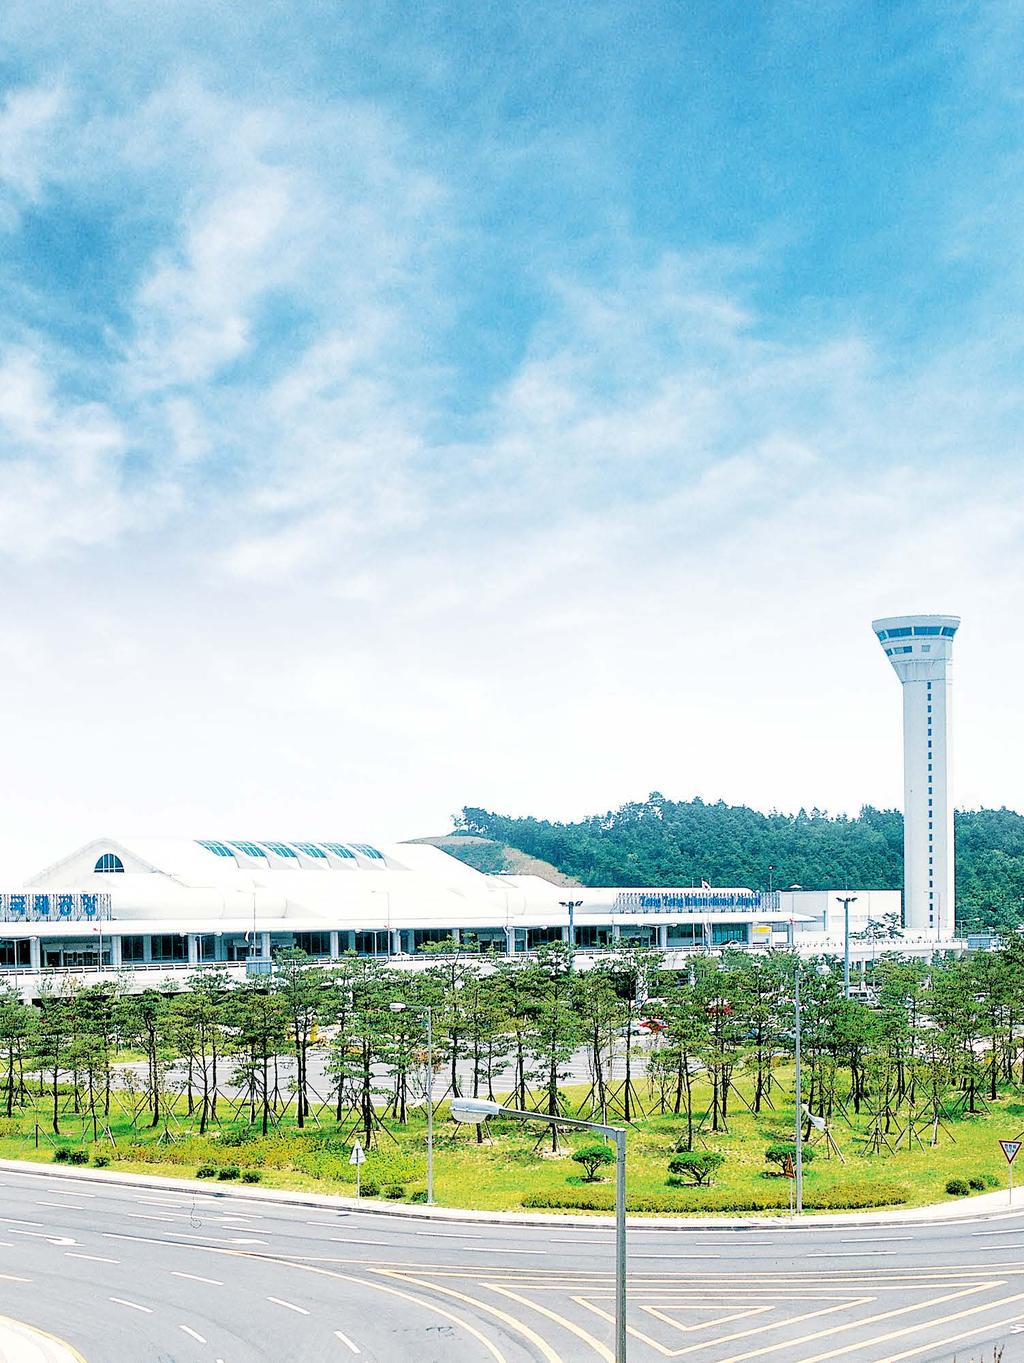 General Overview Yangyang International Airport It is the only airport that serves the northeastern region of the country A gateway airport to Pyeongchang, the host city of 2018 Winter Olympic Games